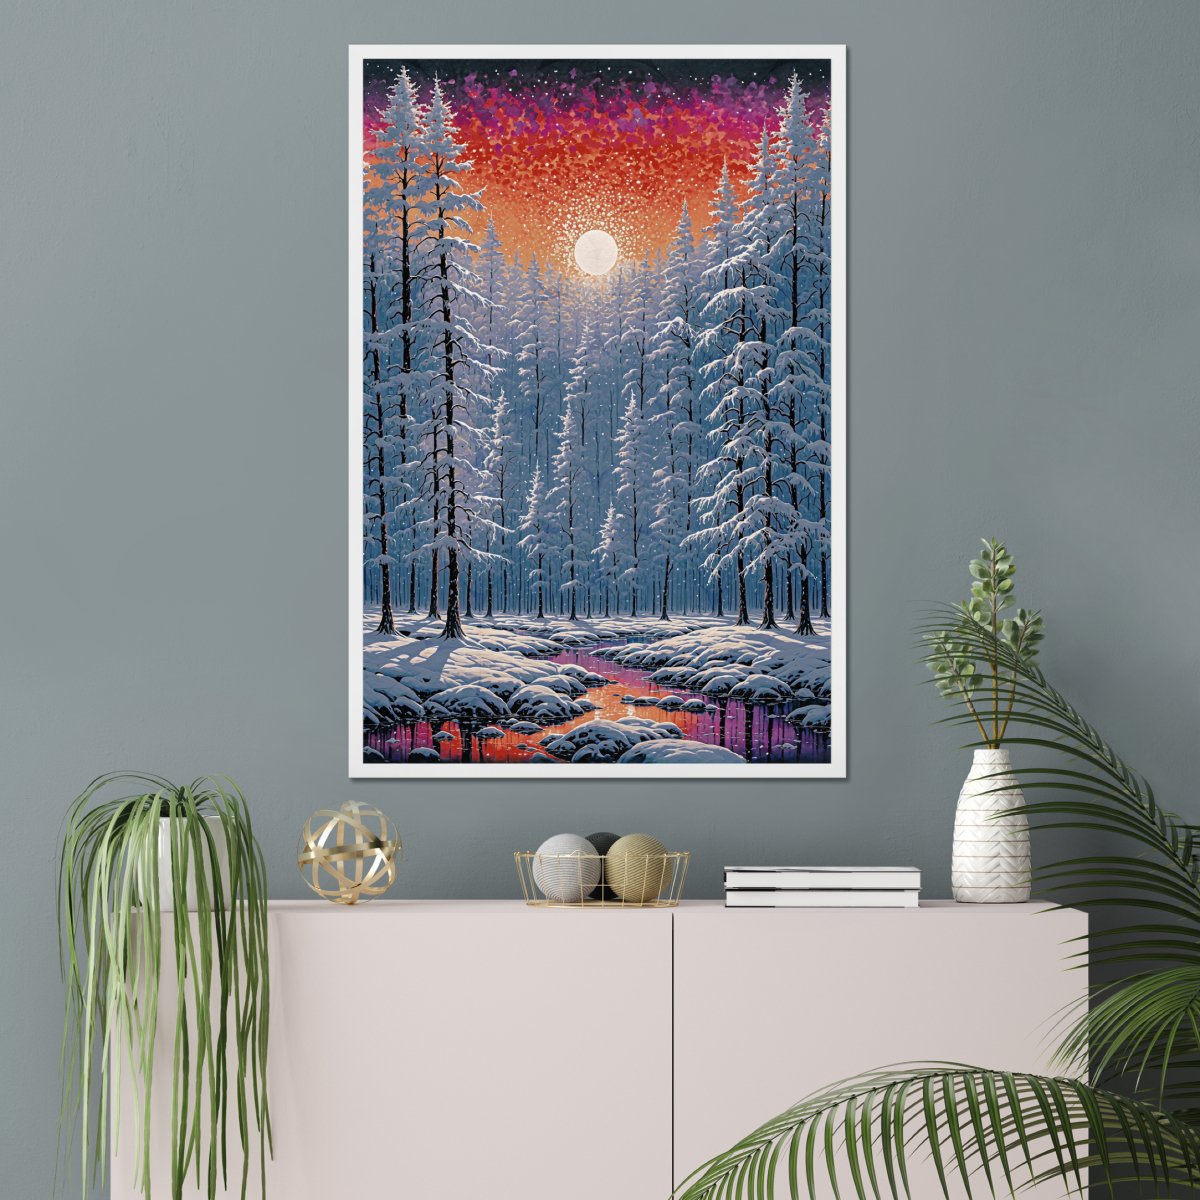 Frosty spring - Art print - Poster - Ever colorful